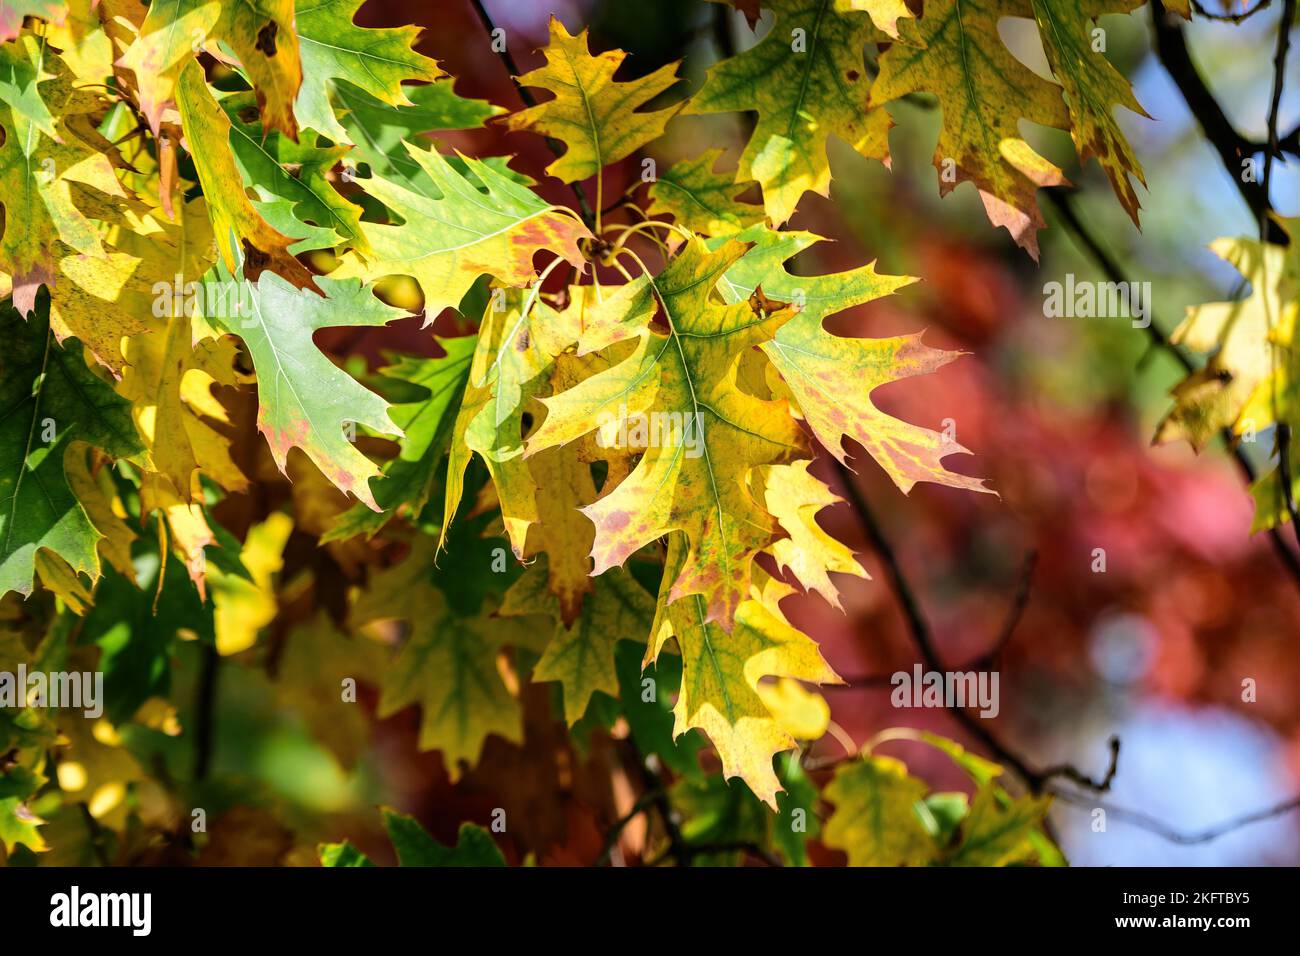 Minimalist monochrome background with many large yellow and green leaves on tree branches  in a garden in a sunny autumn day Stock Photo